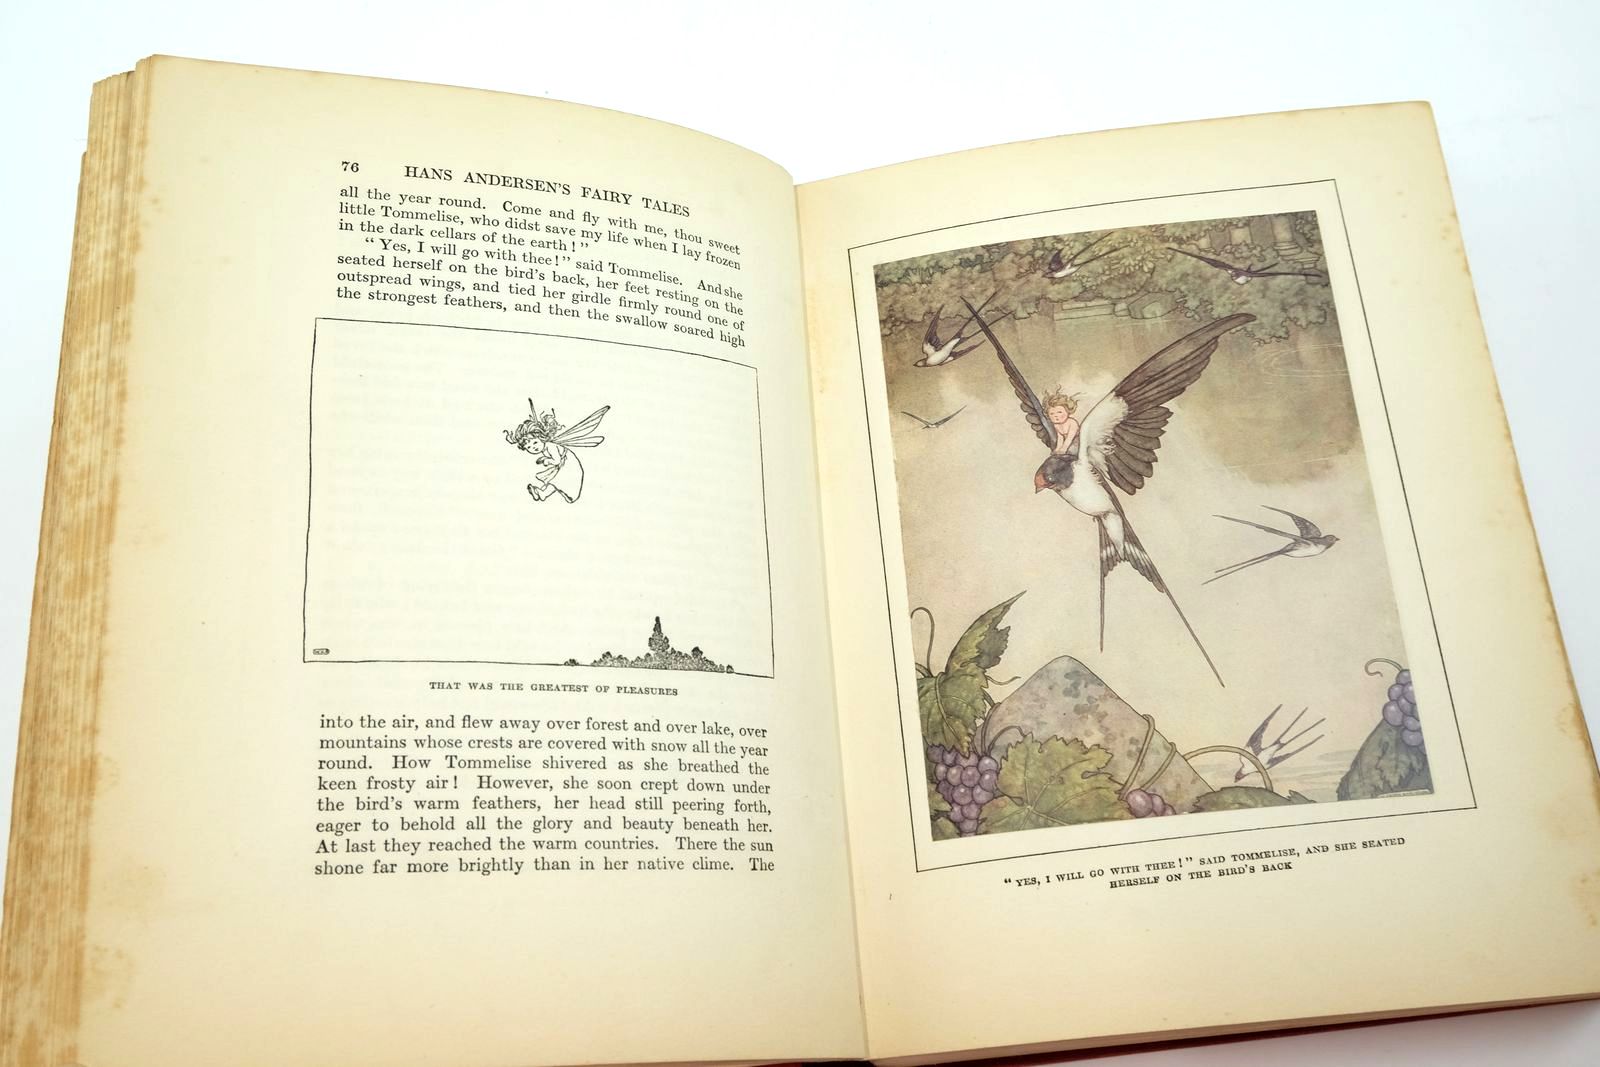 Photo of HANS ANDERSEN'S FAIRY TALES written by Andersen, Hans Christian illustrated by Robinson, W. Heath published by Hodder & Stoughton, Boots the Chemists (STOCK CODE: 2139410)  for sale by Stella & Rose's Books